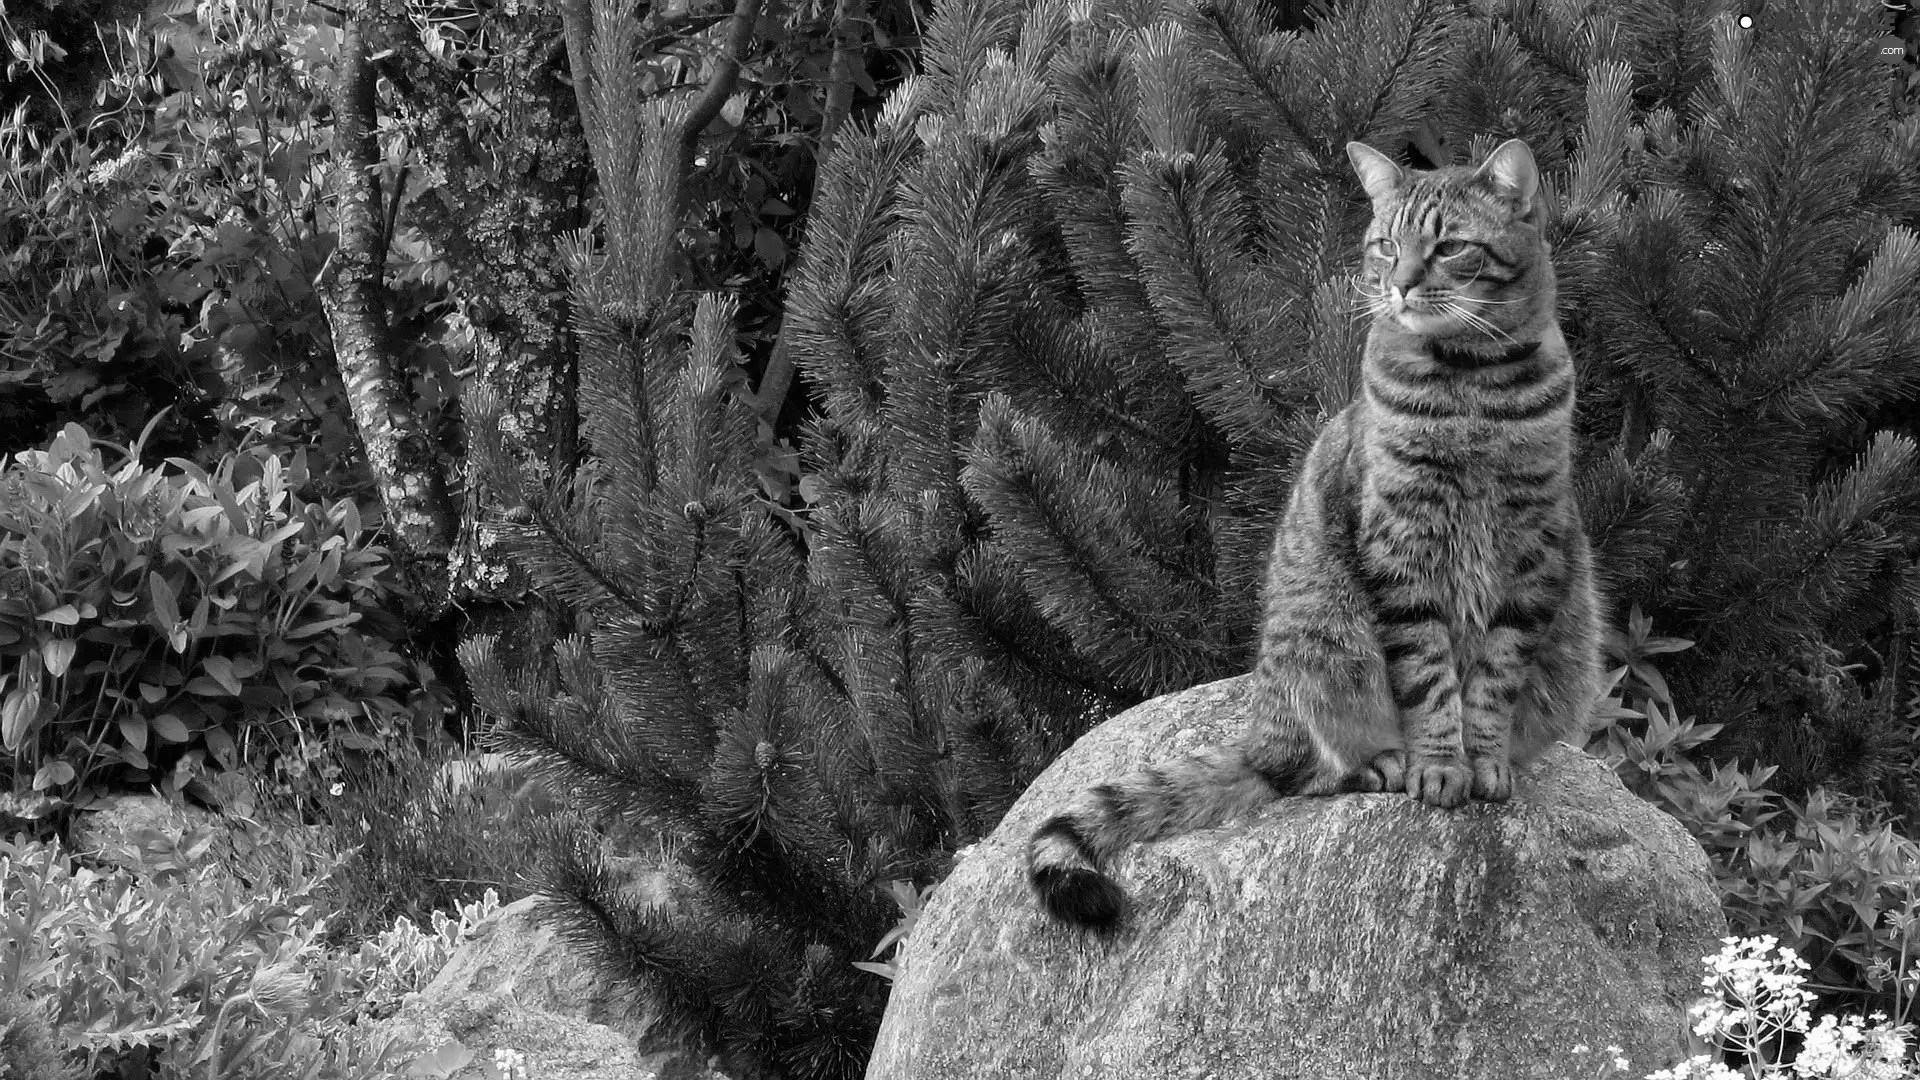 viewes, Conifers, Stone, trees, cat